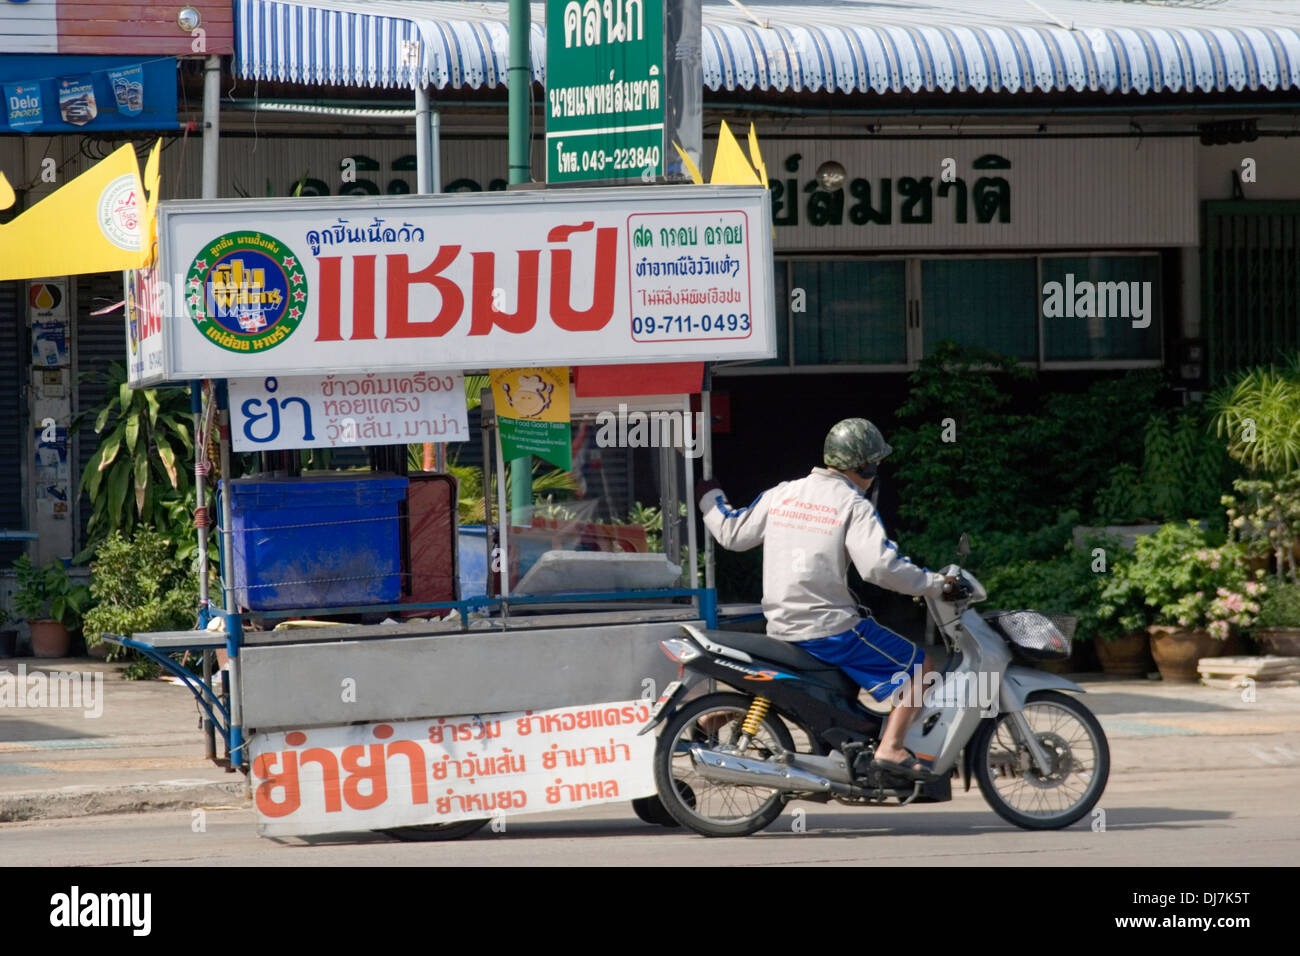 A vendor is pulling a food cart while riding a motorcycle on a city street in Khon Kaen, Thailand. Stock Photo